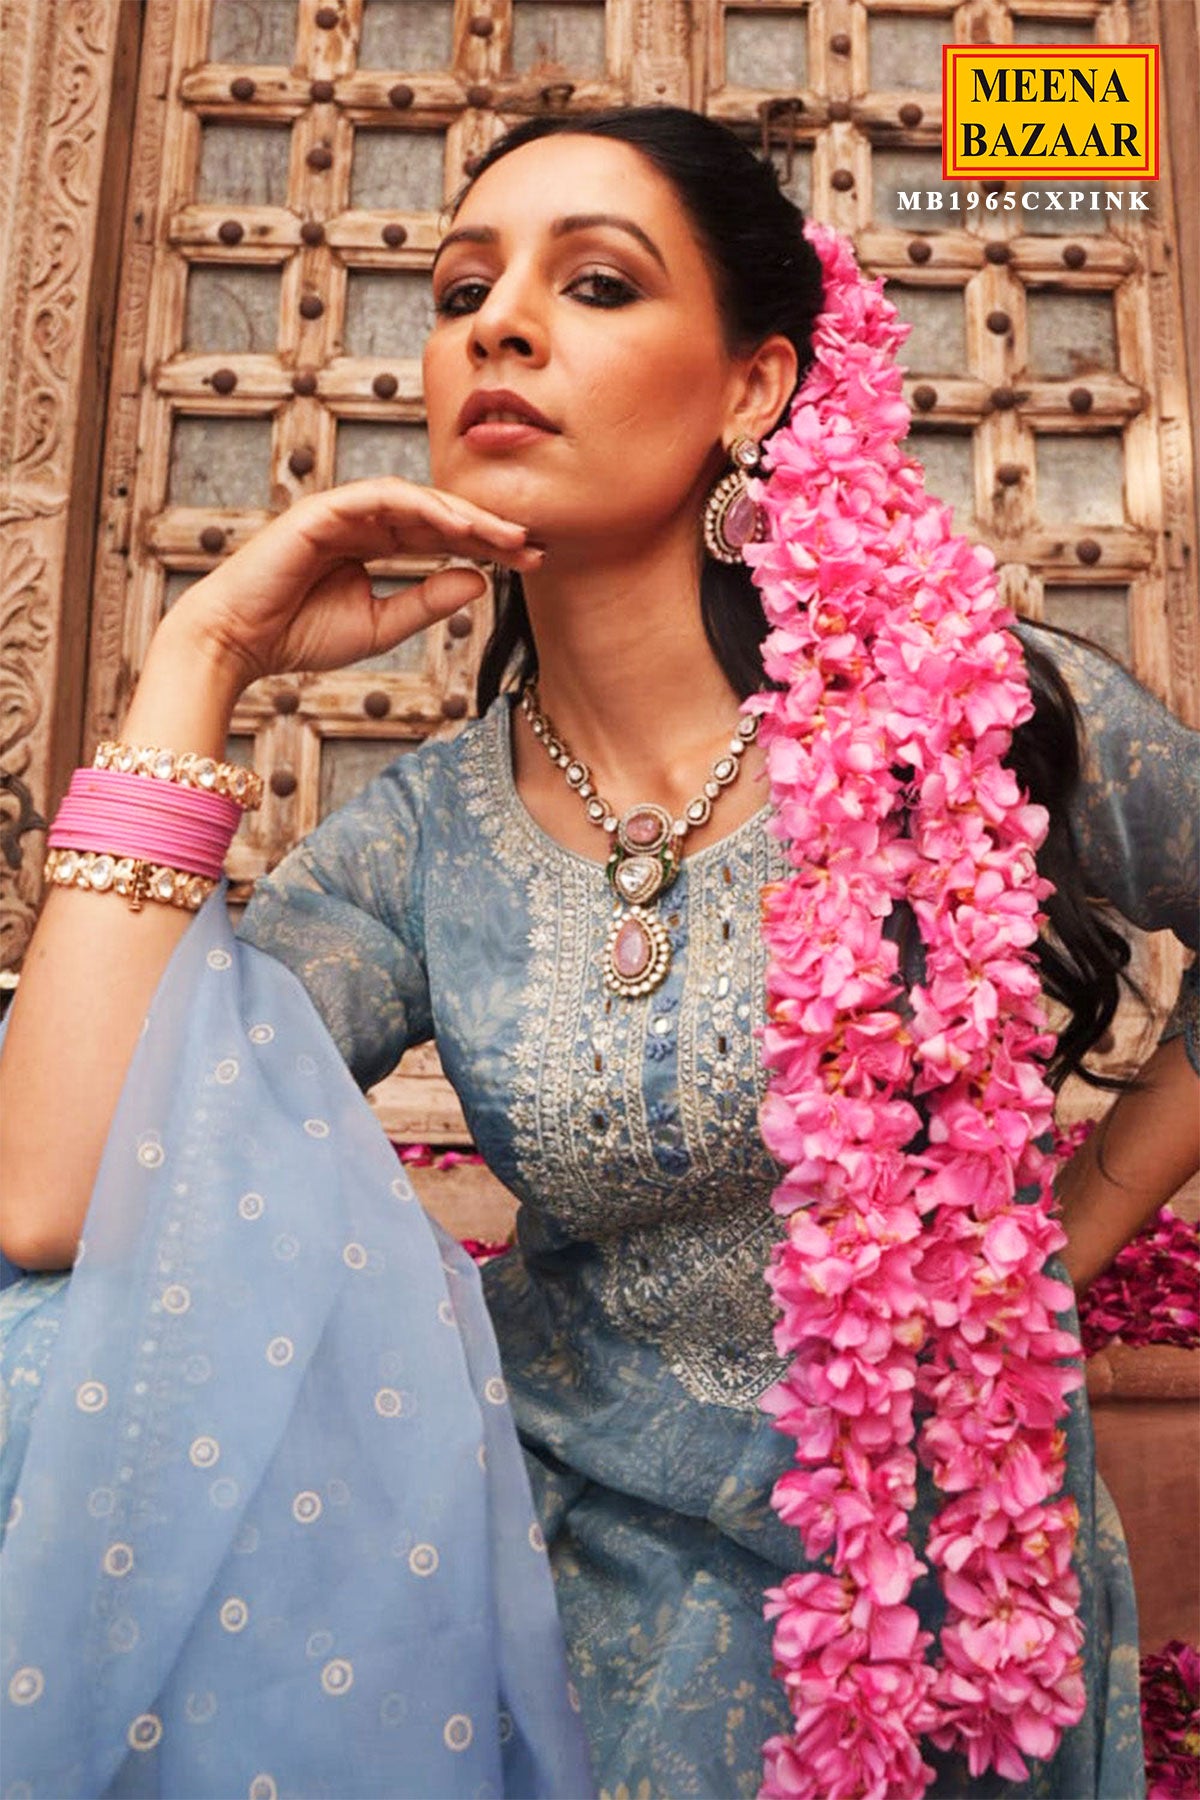 Light Blue Organza Floral Printed Zari Embroidered Suit with Dupatta